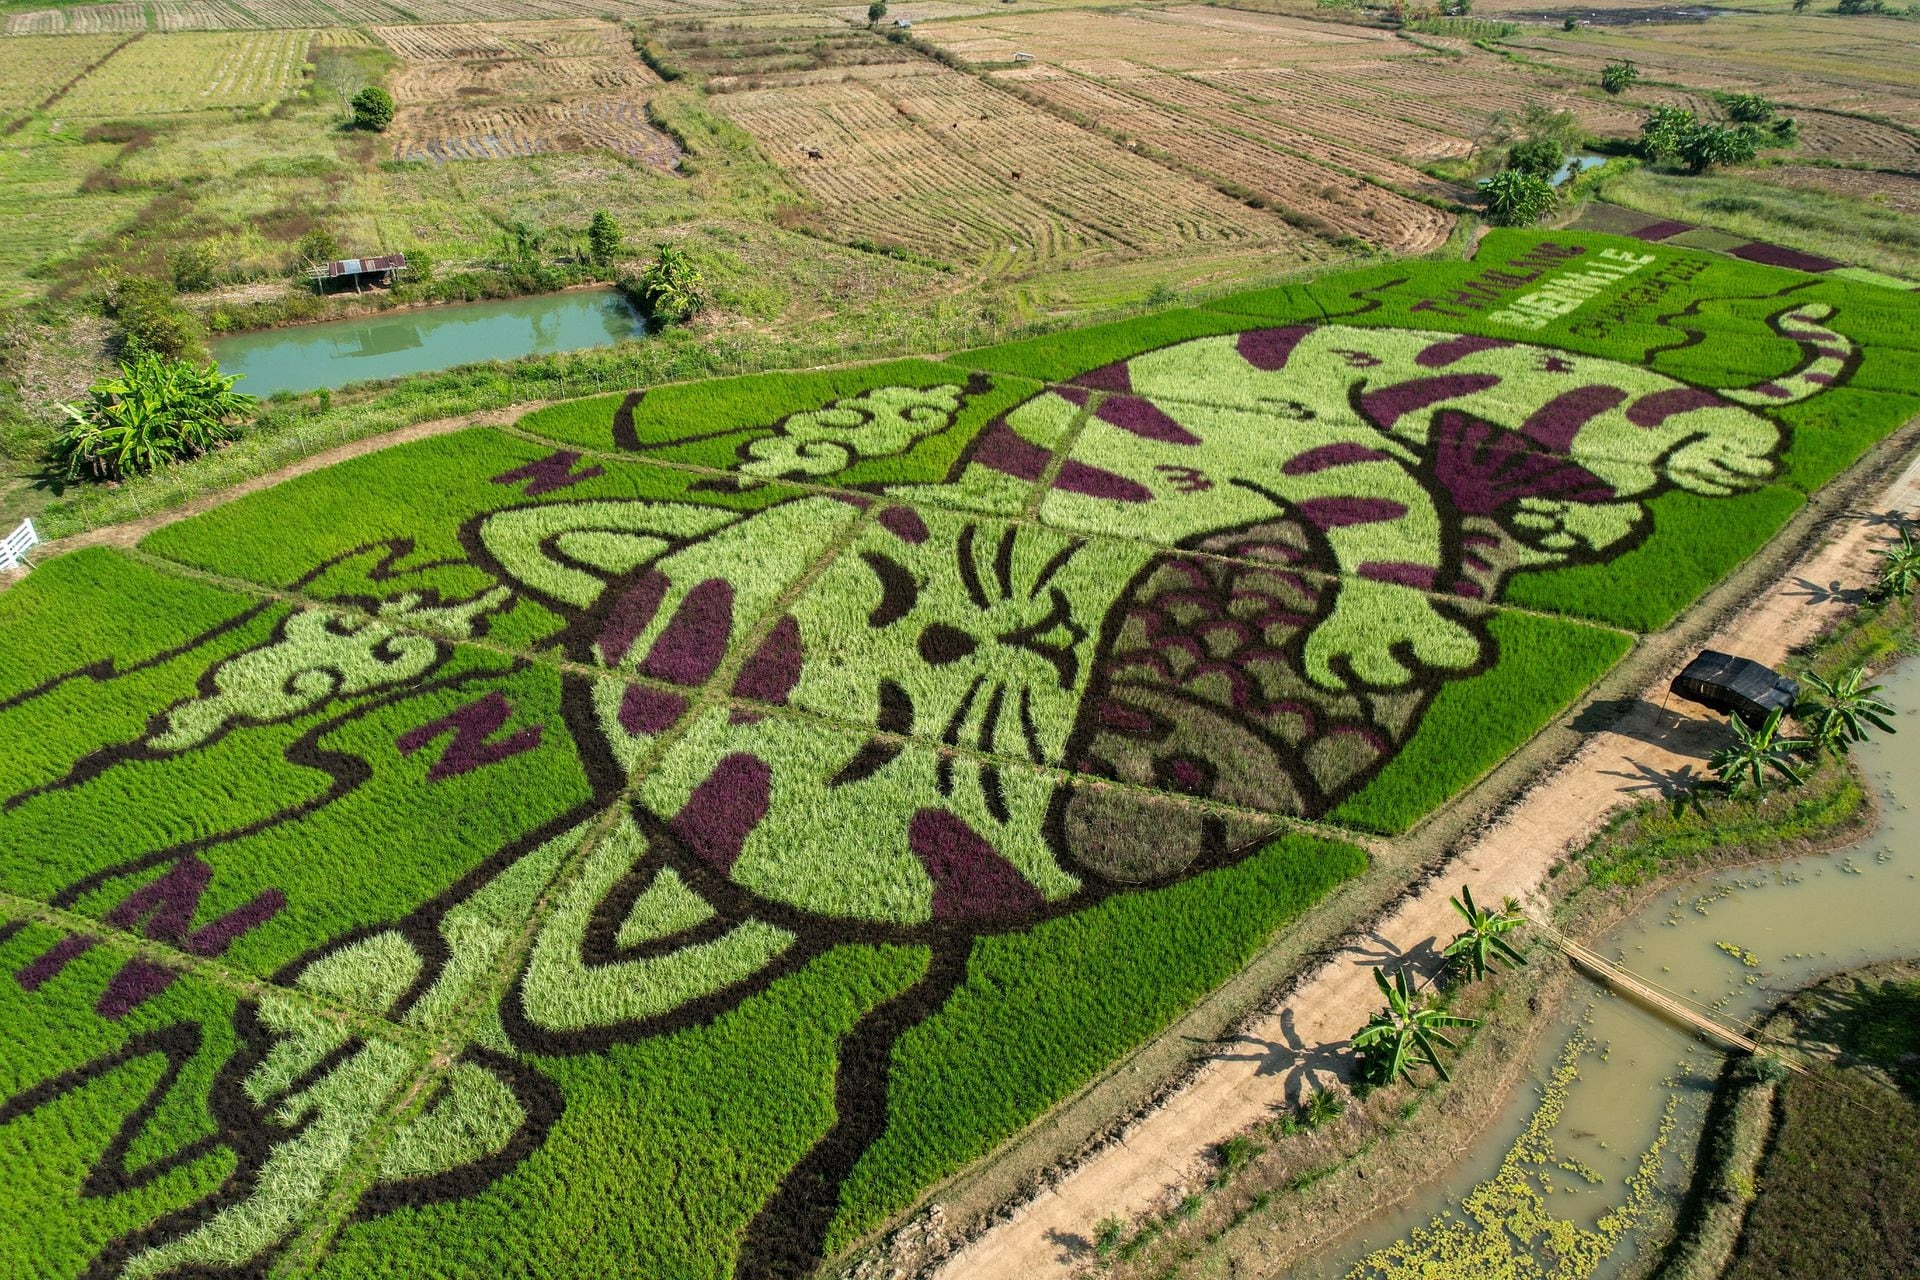 A farmer from Thailand creates huge images of cats in rice fields